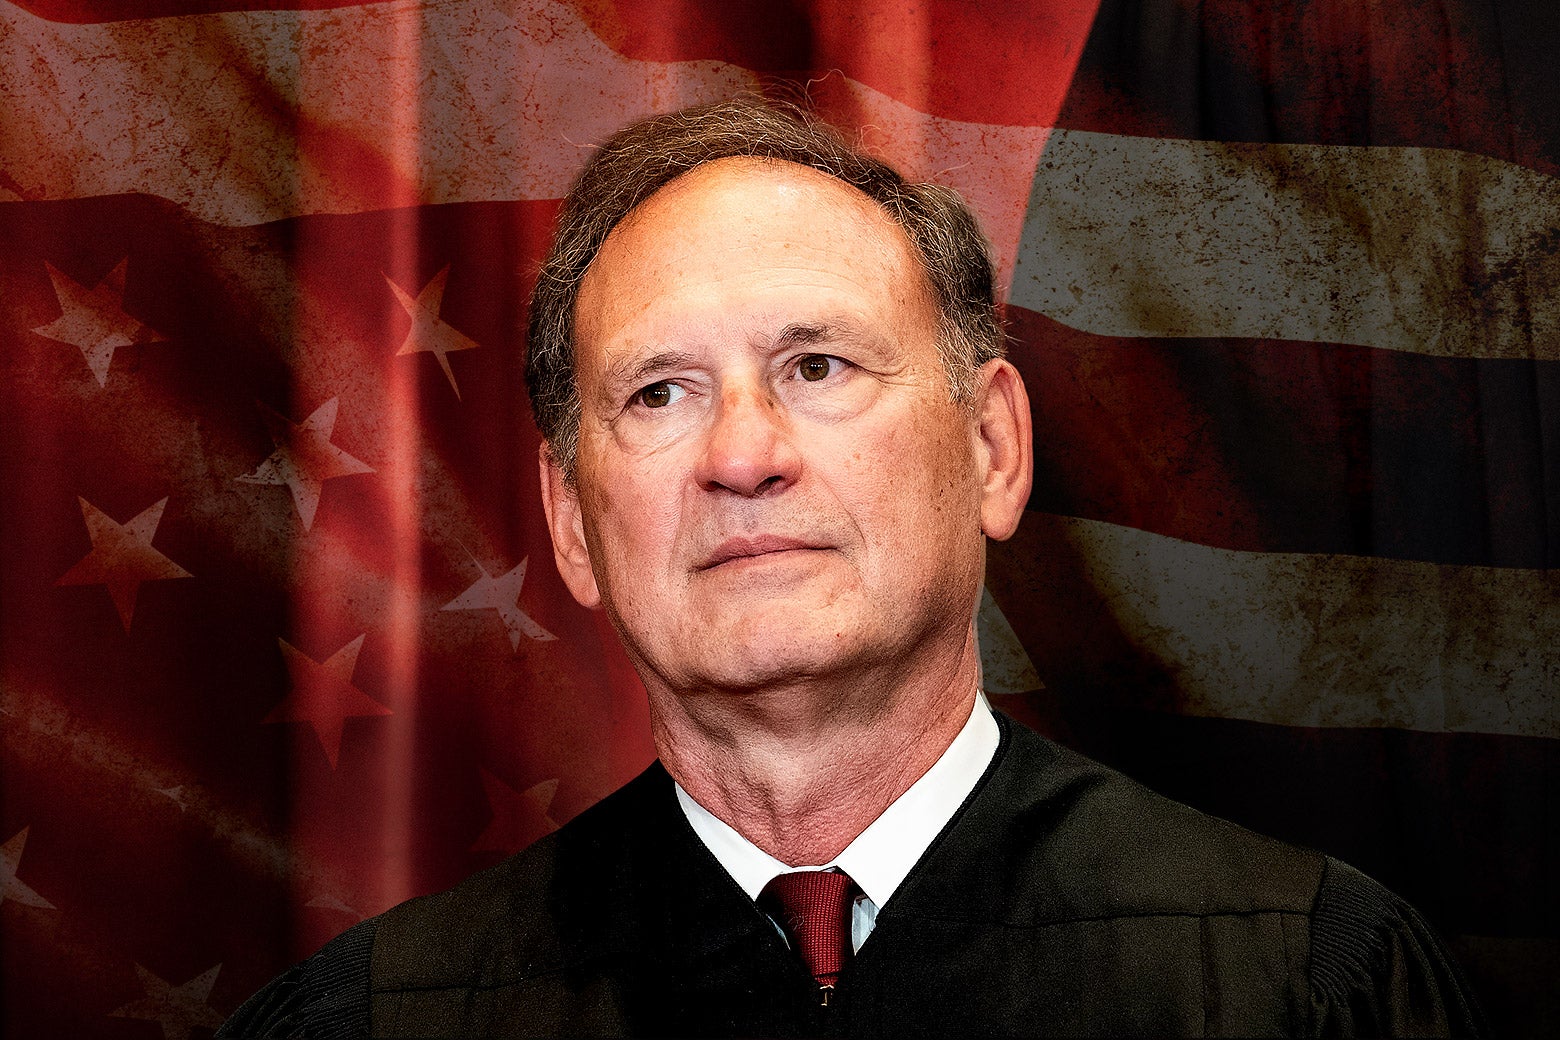 Alito’s Explanation for the Upside-Down American Flag Honestly Makes It Worse Dahlia Lithwick and Mark Joseph Stern